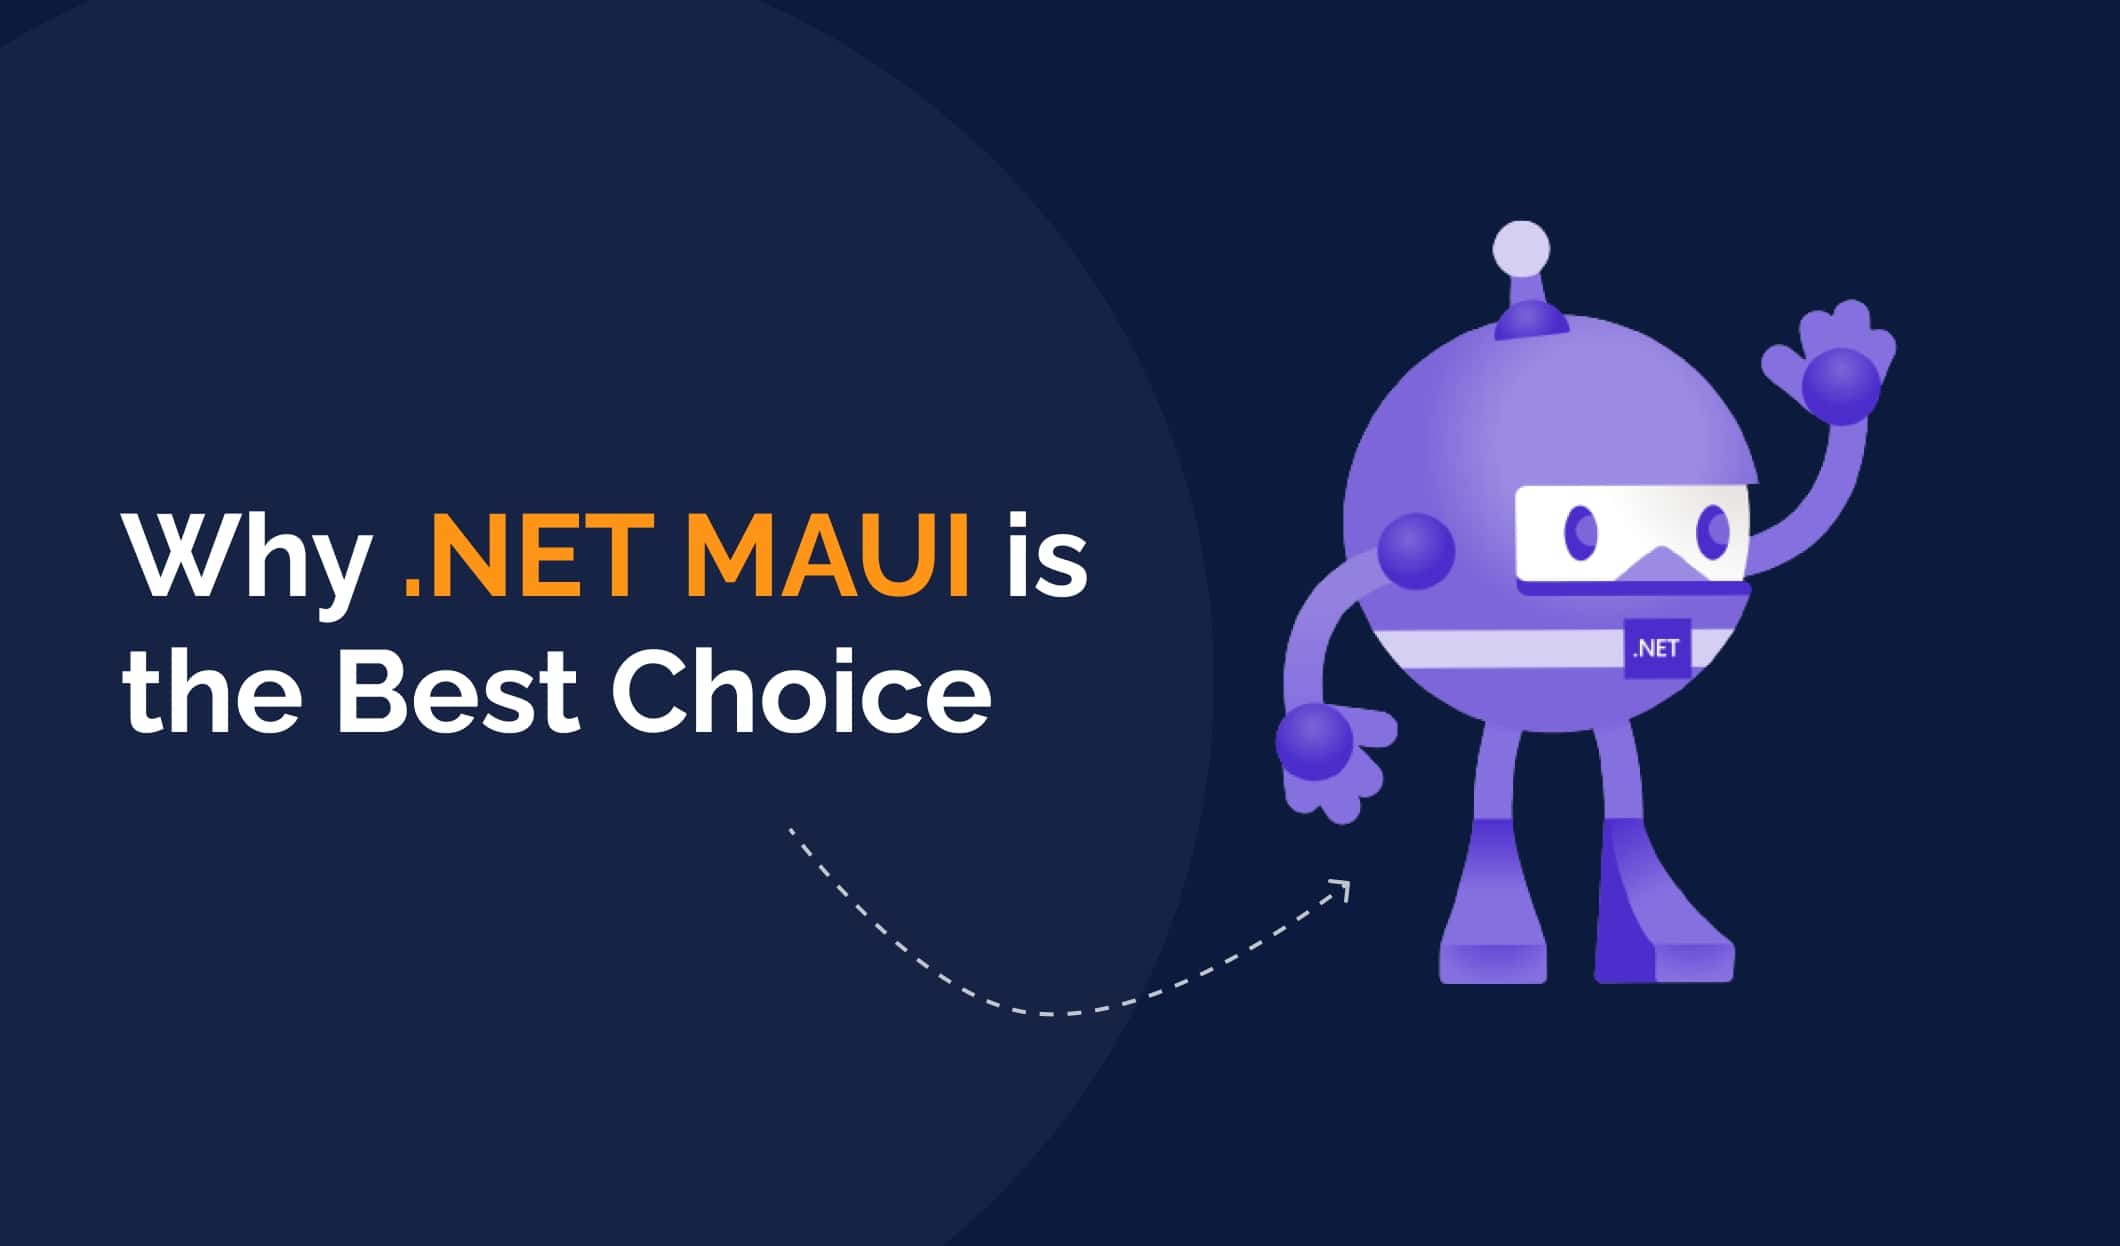 Why is .NET MAUI the Best Choice for App Development?